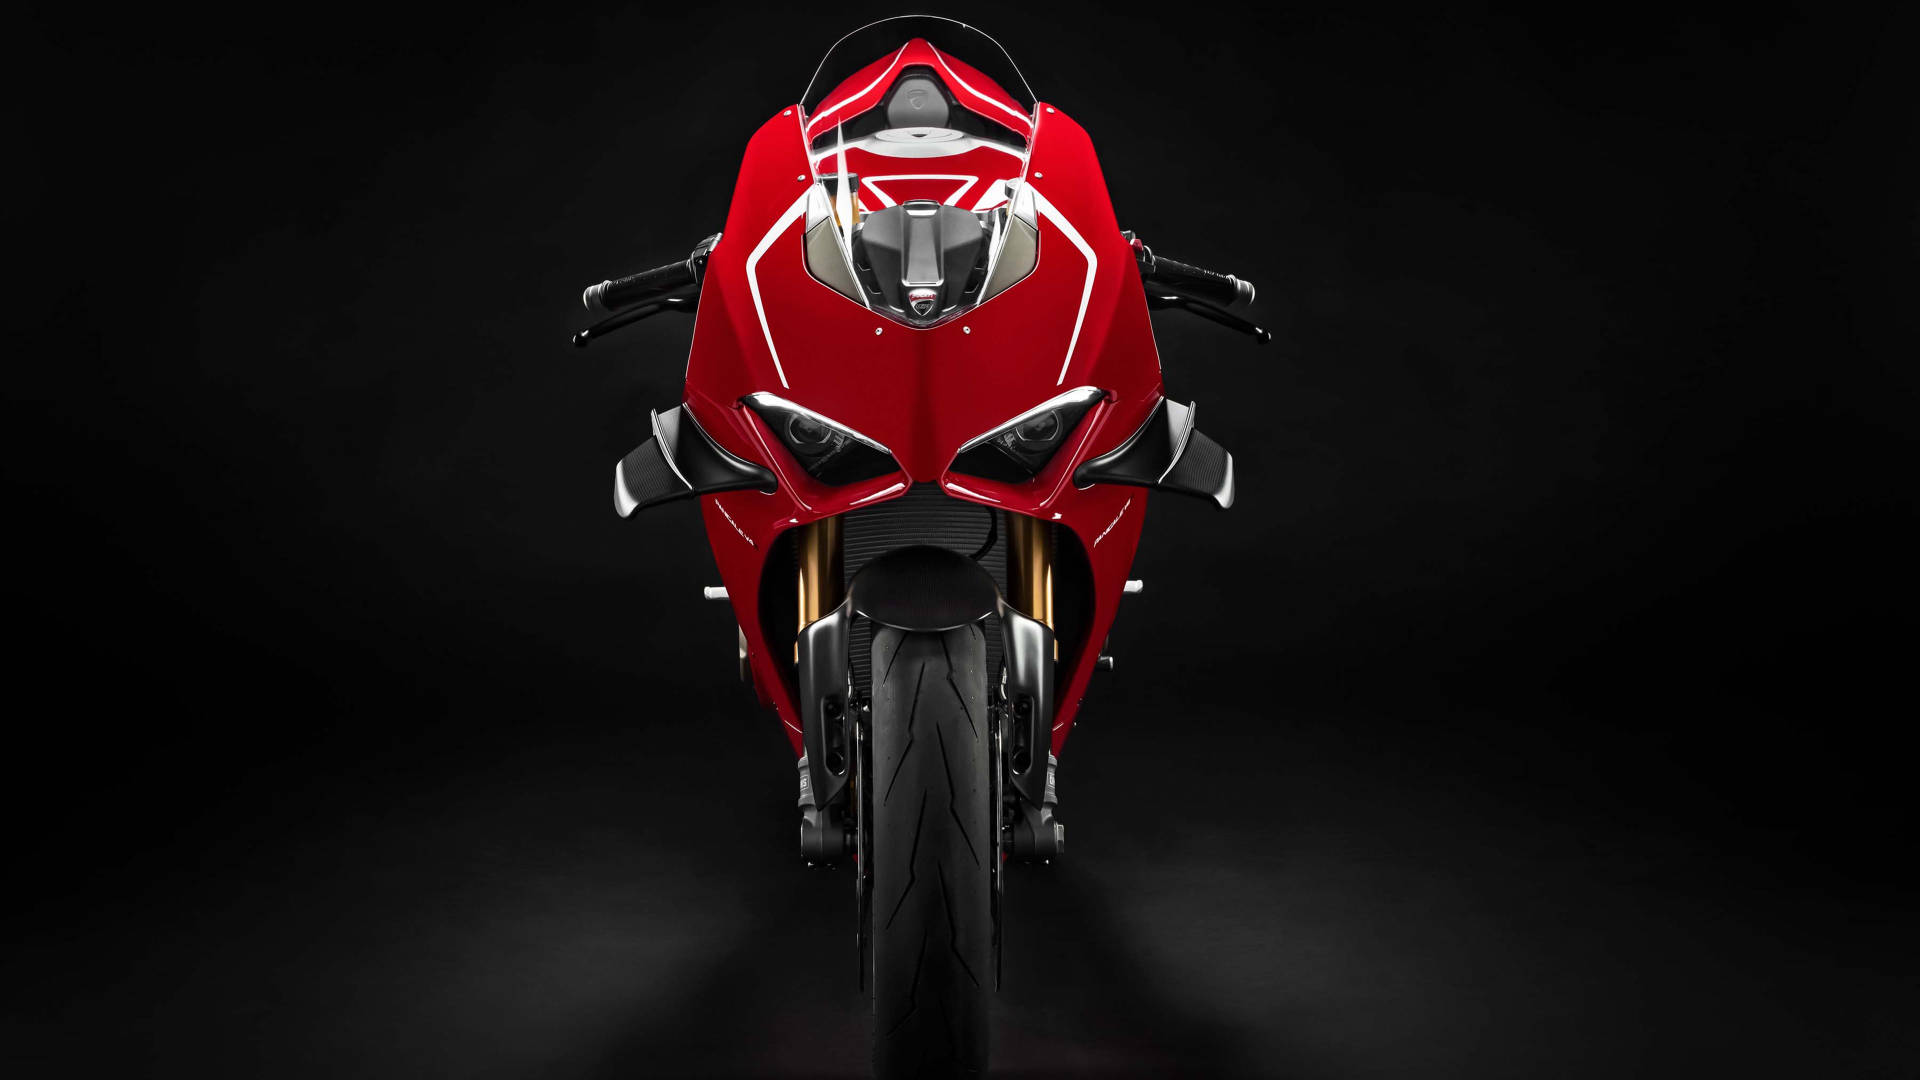 High-speed Thrill With Ducati Wallpaper